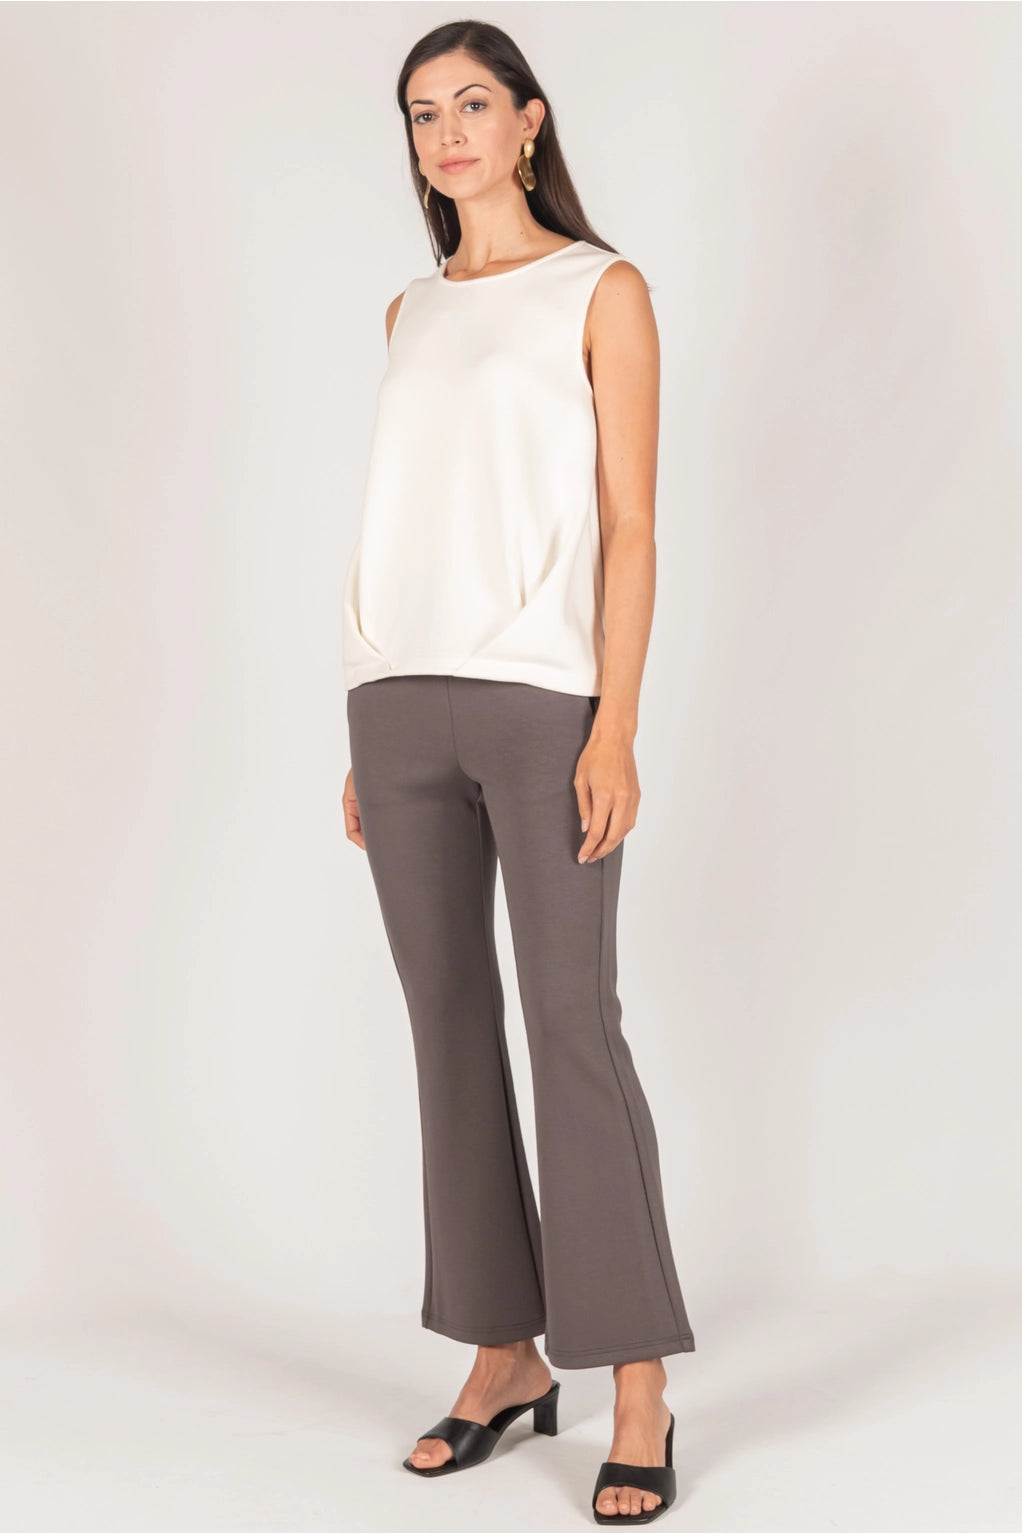 Butter Modal Fitted Flare Pants- Two Colors